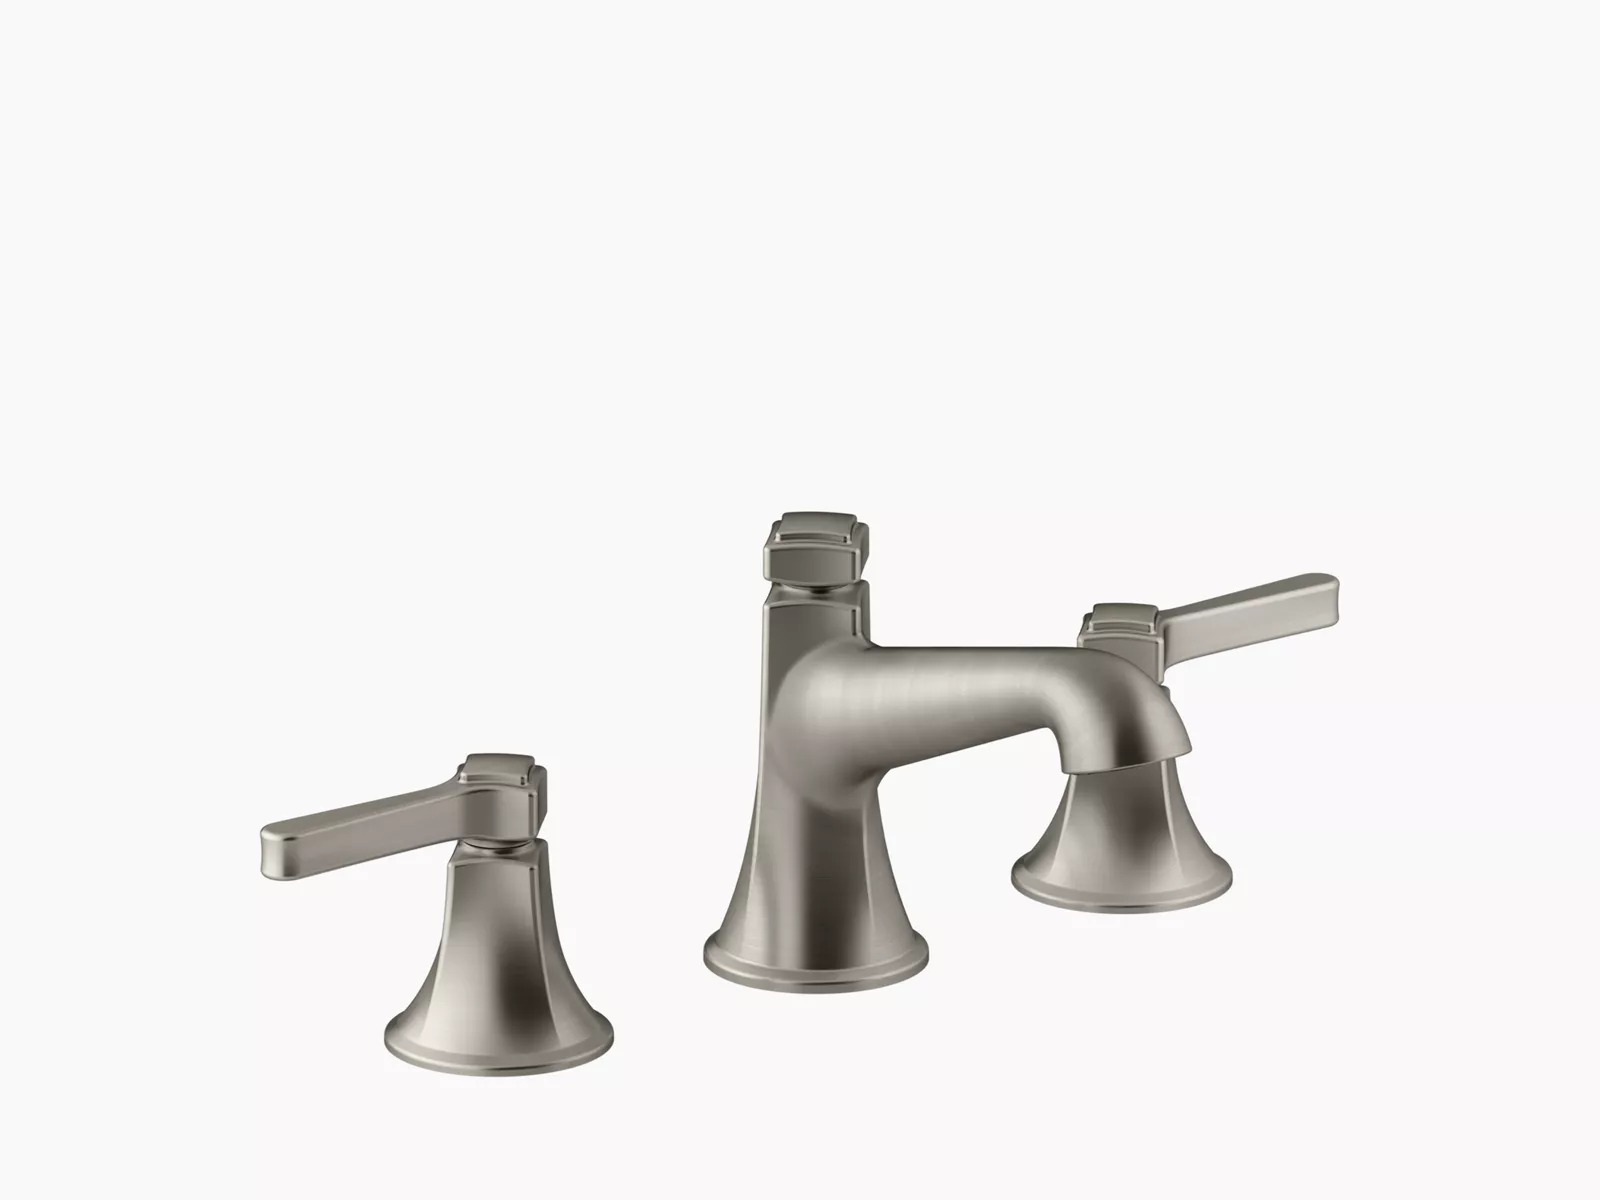 Wash basin mixer NT7060 with pull-out shower head (Hara) for only